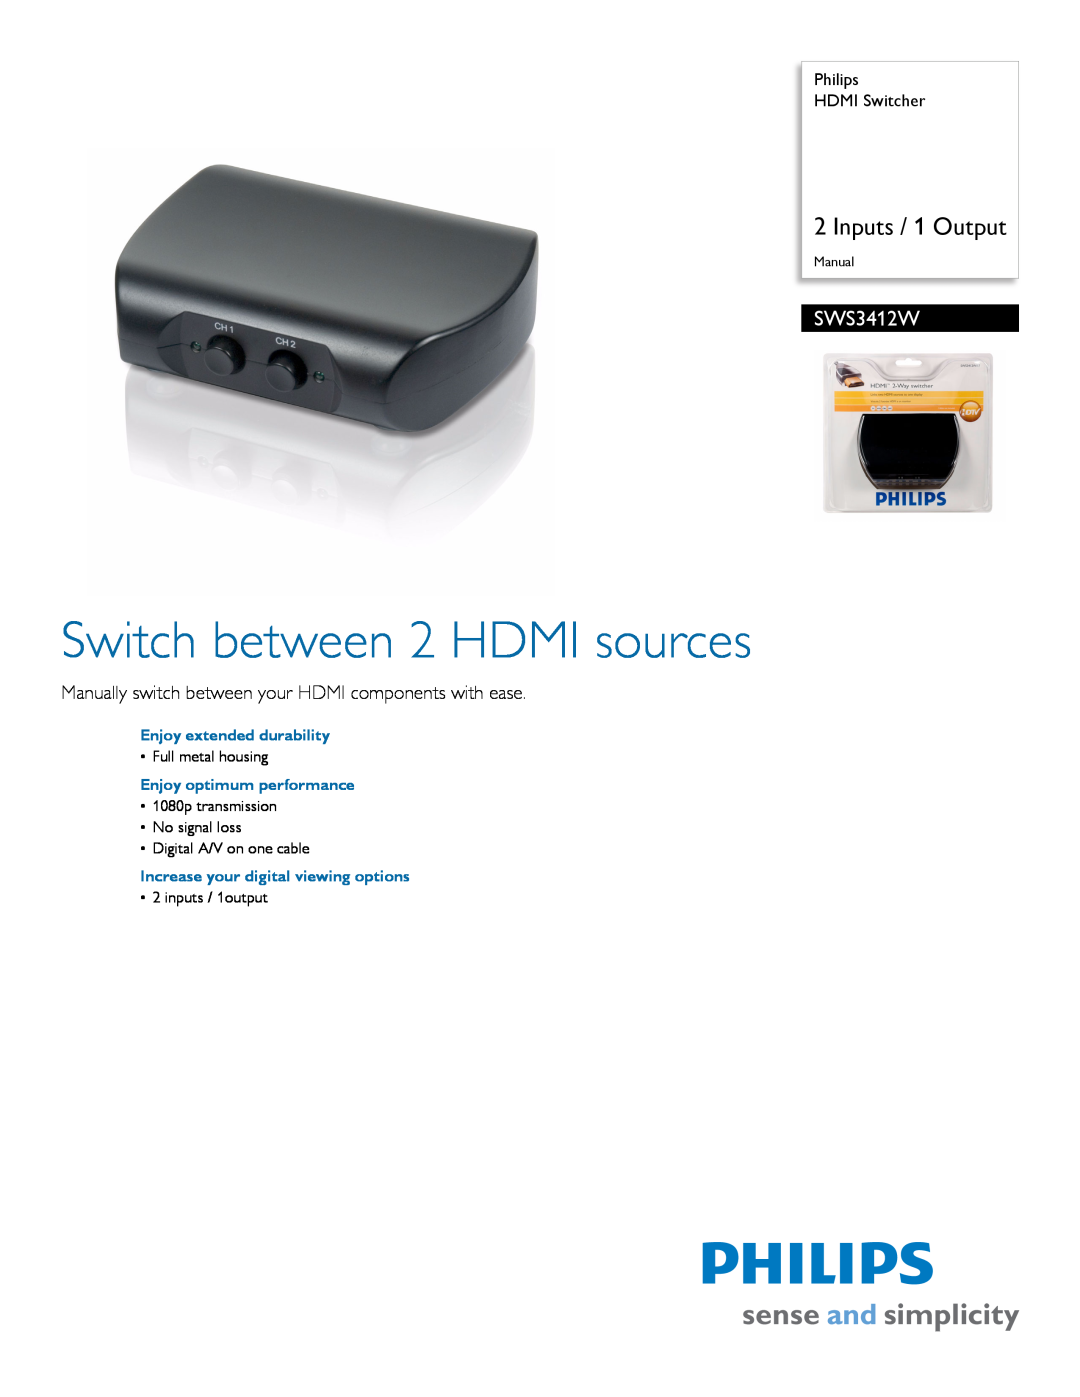 Philips SWS3412W manual Philips HDMI Switcher, Enjoy extended durability, Enjoy optimum performance, Inputs / 1 Output 